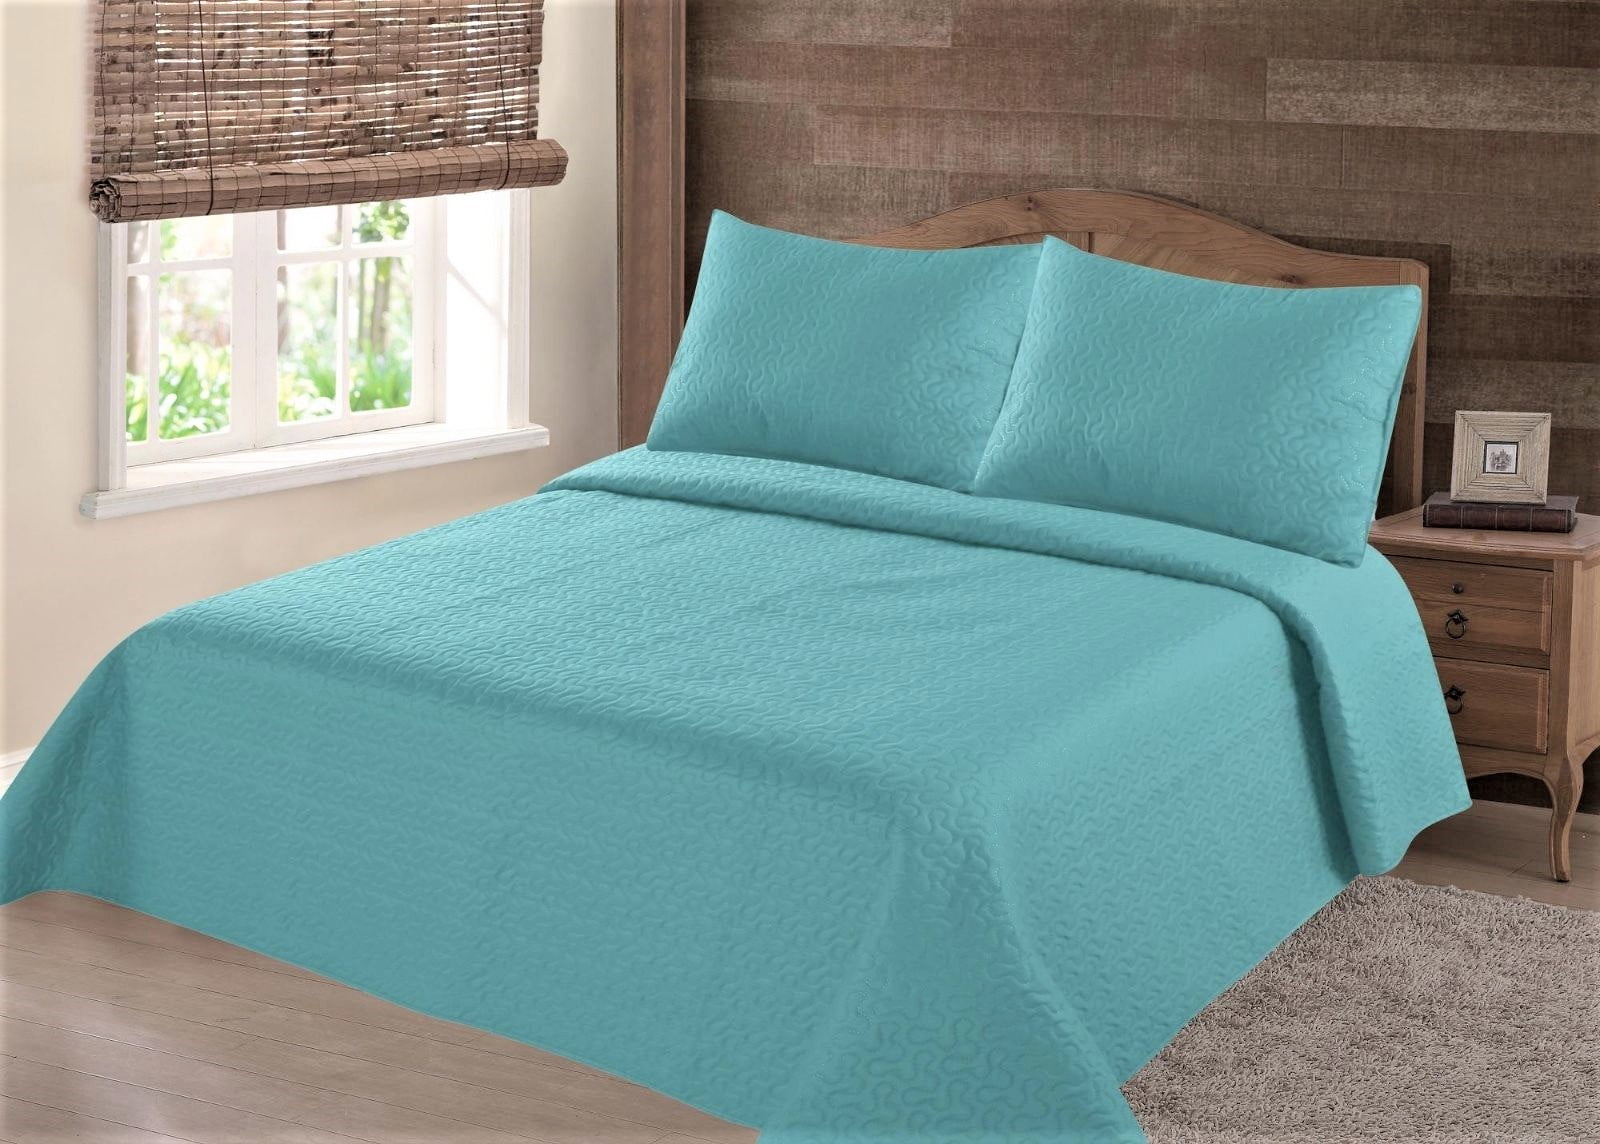 MIDWEST TURQUOISE NENA SOLID QUILT BEDDING BEDSPREAD COVERLET PILLOW CASES SET 